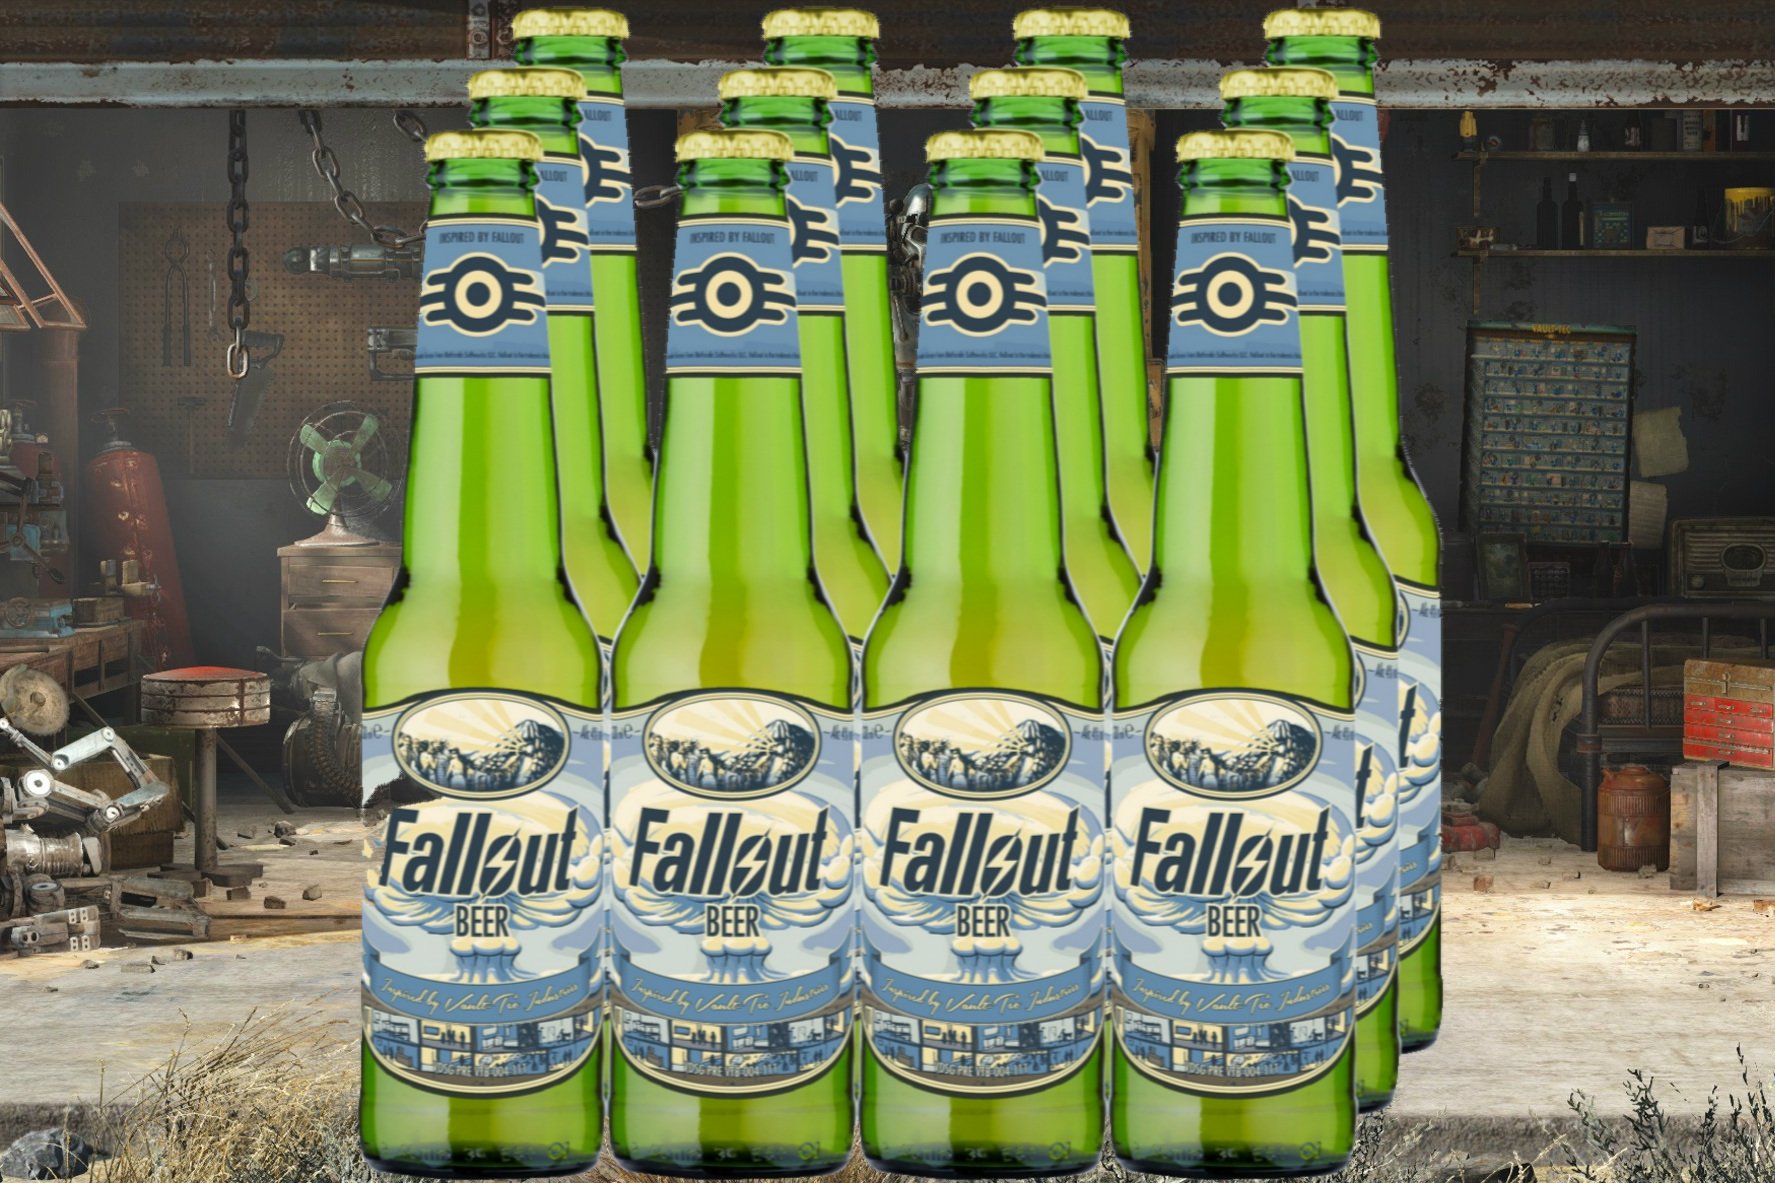 fallout, Sci fi, Warrior, Action, Fighting, Shooter, Sci fi, Futuristic, Apocalyptic, Poster, Beer, Alcohol Wallpaper